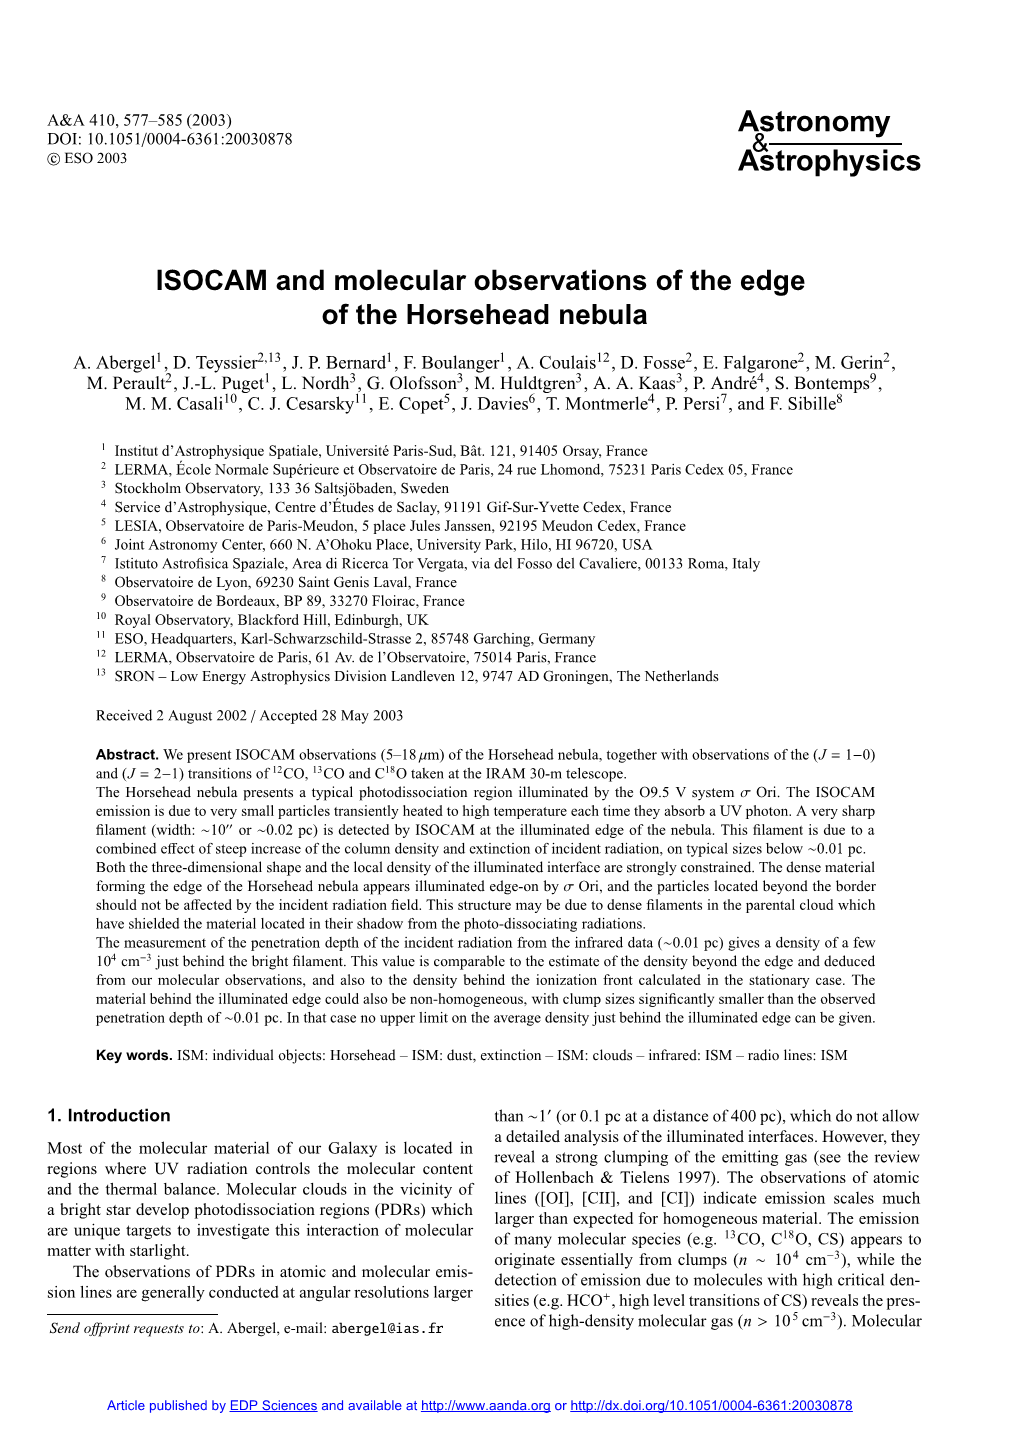 ISOCAM and Molecular Observations of the Edge of the Horsehead Nebula